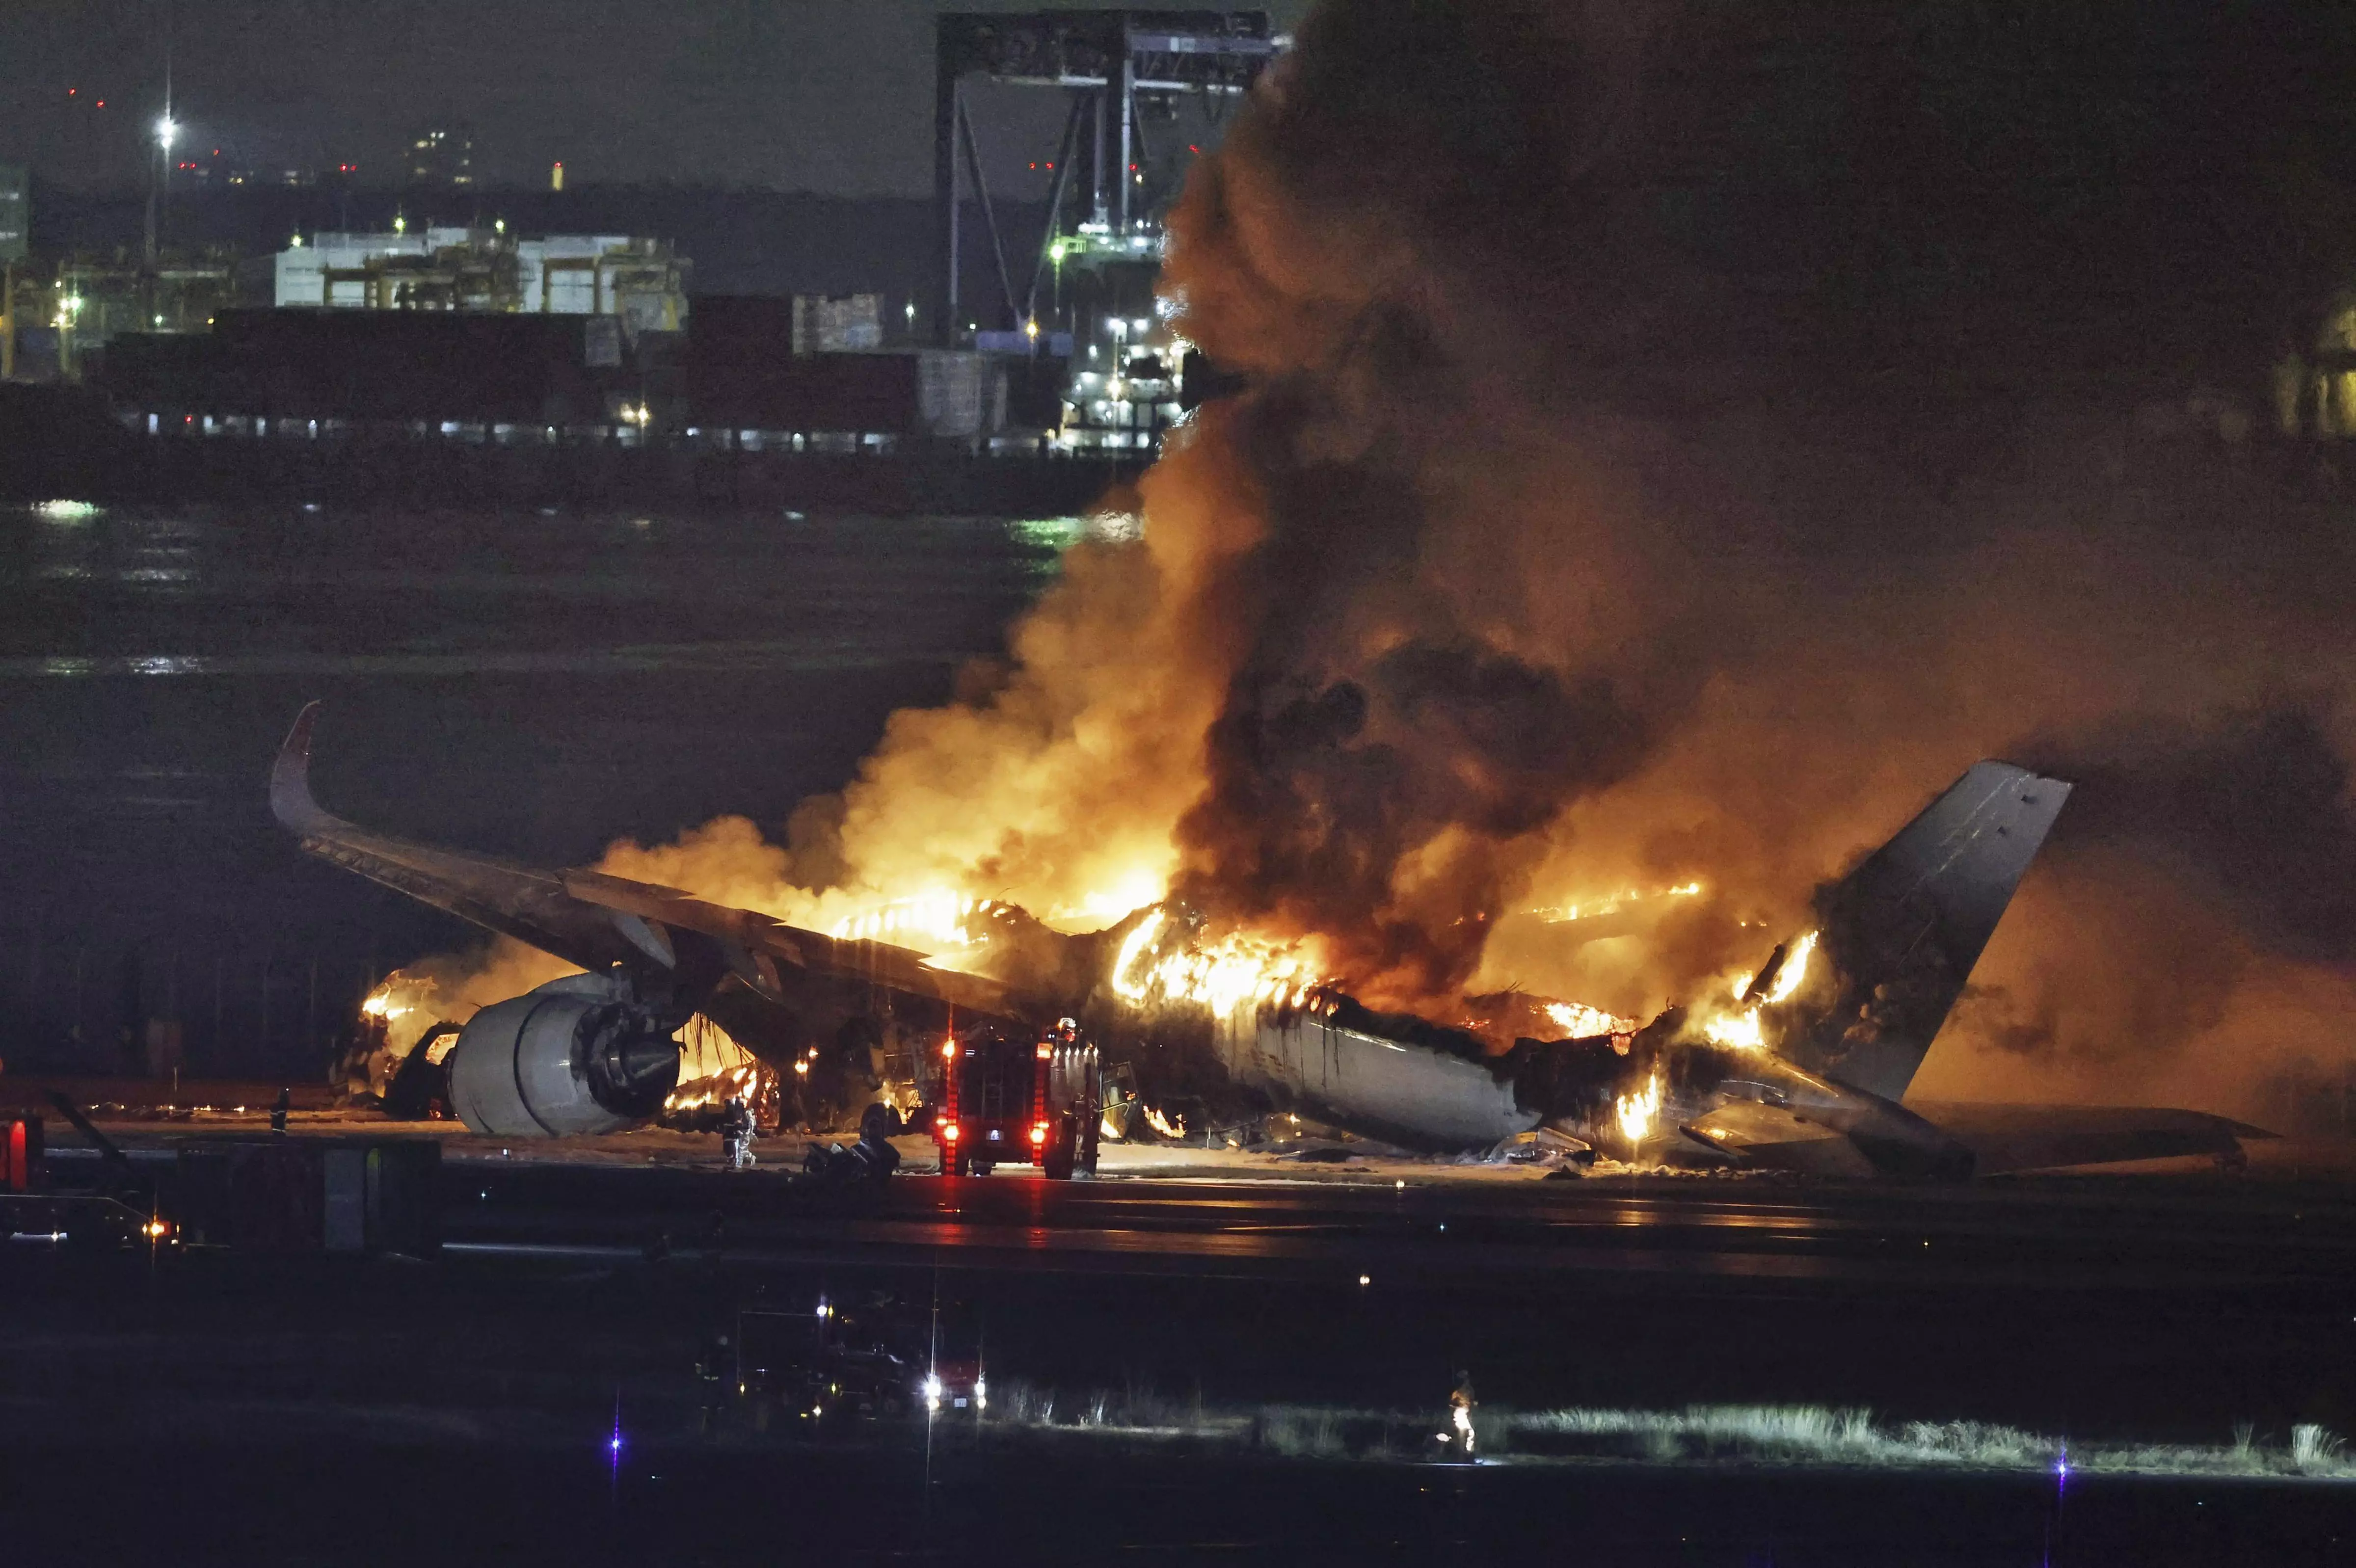 Explained: Why the jet in Japan plane crash didn’t explode upon impact